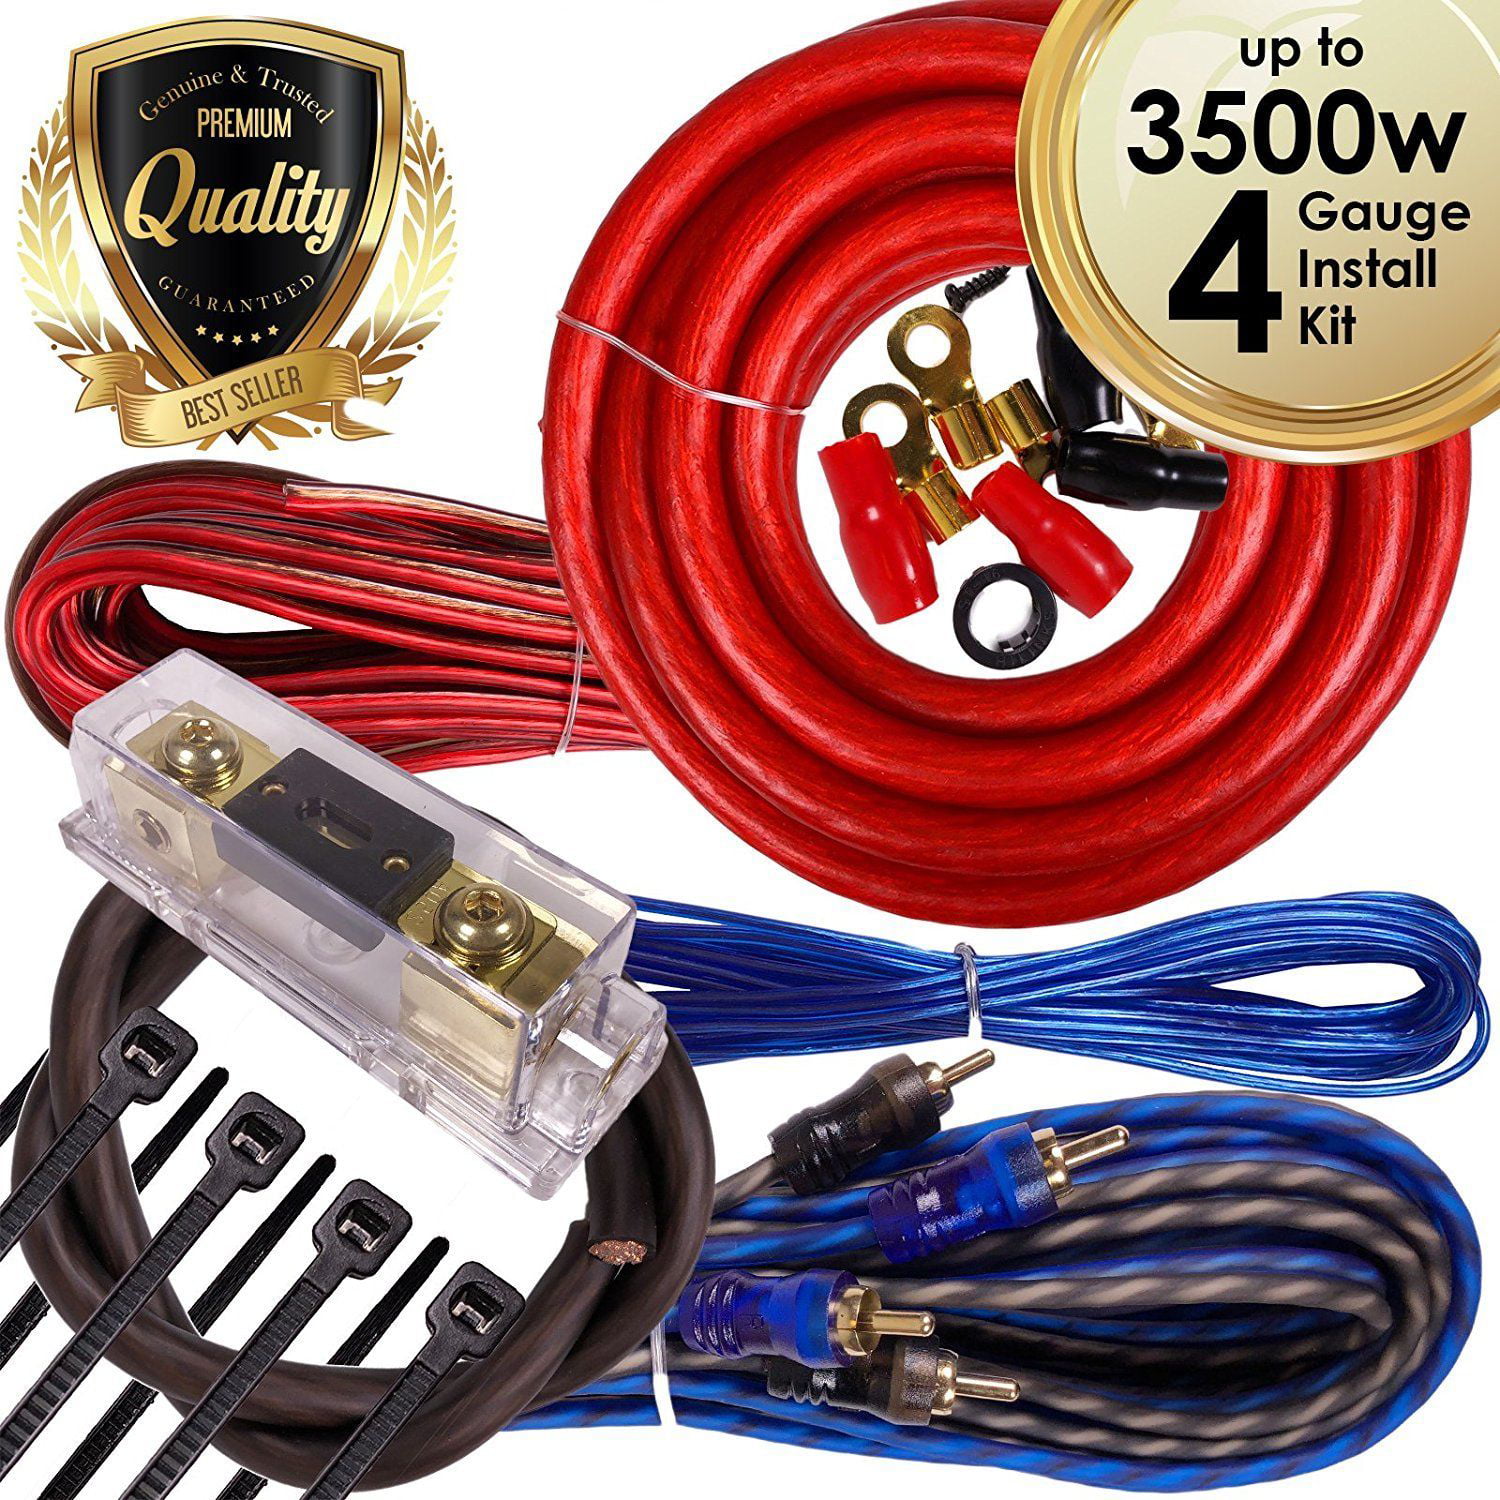 2 AWG GAUGE 17 FEET RED POWER GROUND AMP WIRE 17 FT 